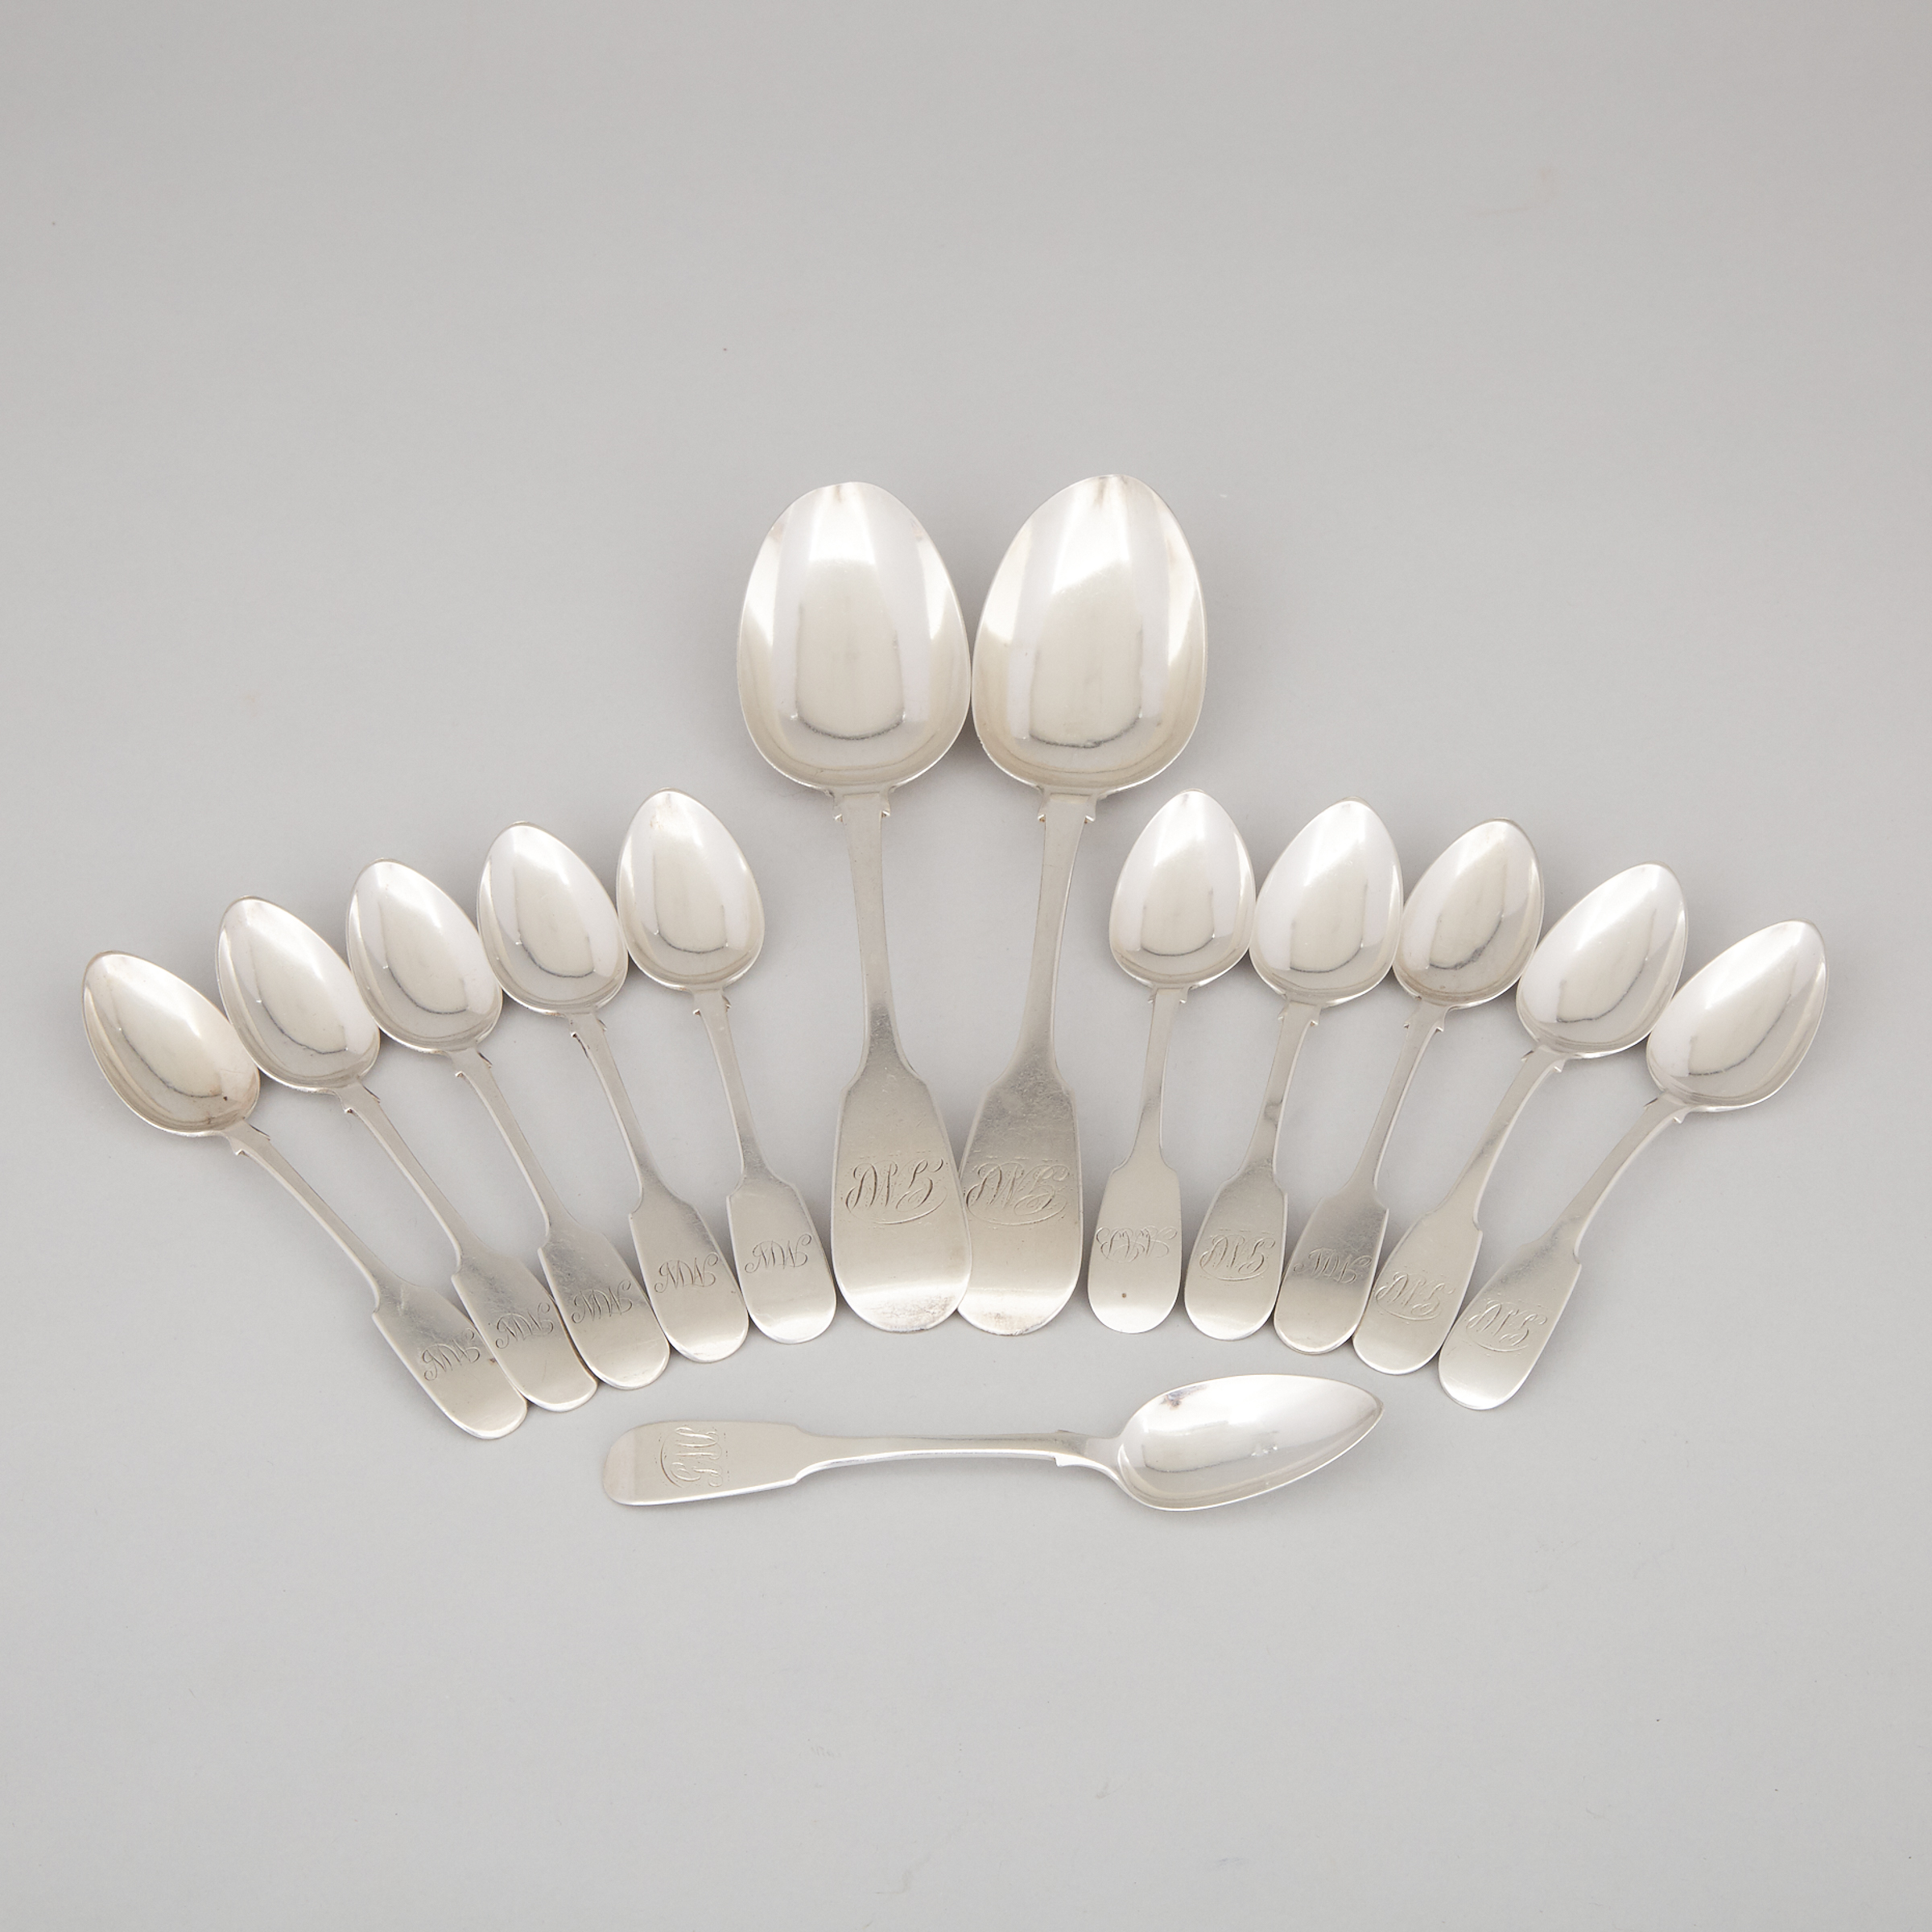 Two Canadian Silver Fiddle Pattern Table Spoons and Eleven Tea Spoons, Richard Kestell Oliver, Toronto, Ont., c.1843-60